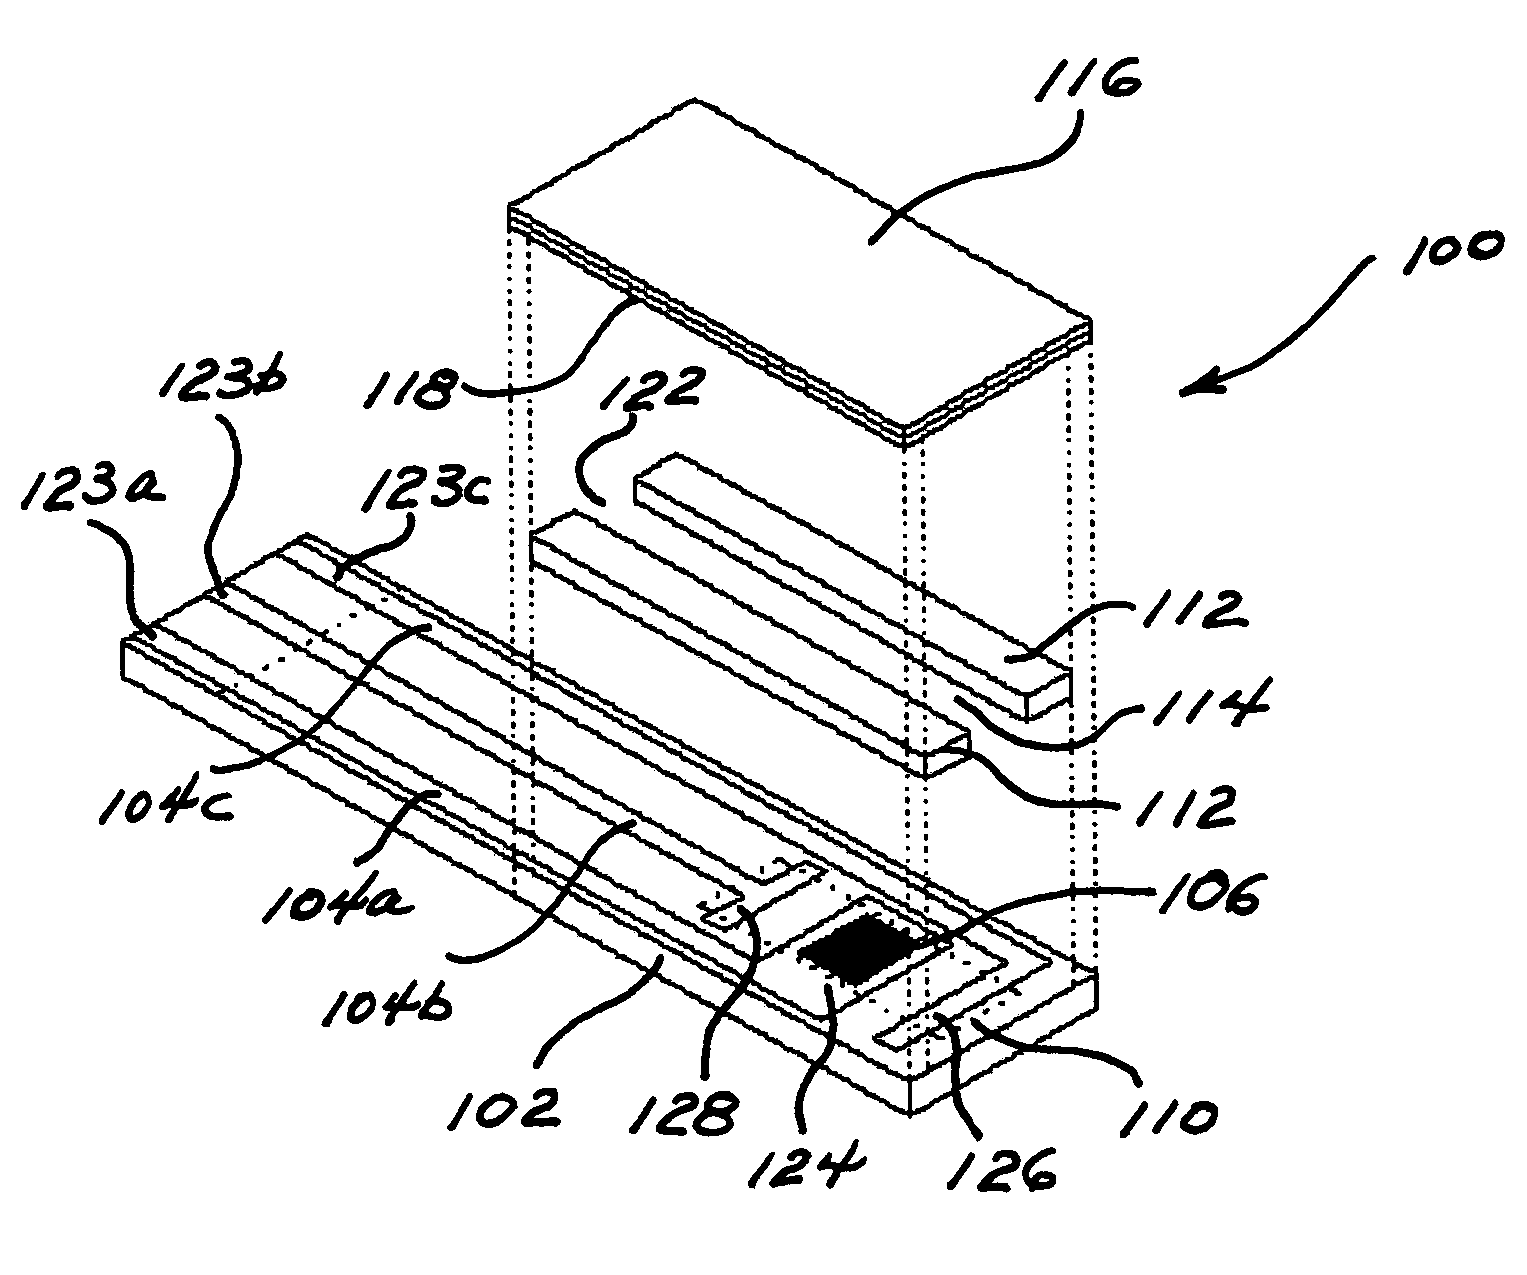 Device having a flow channel containing a layer of wicking material